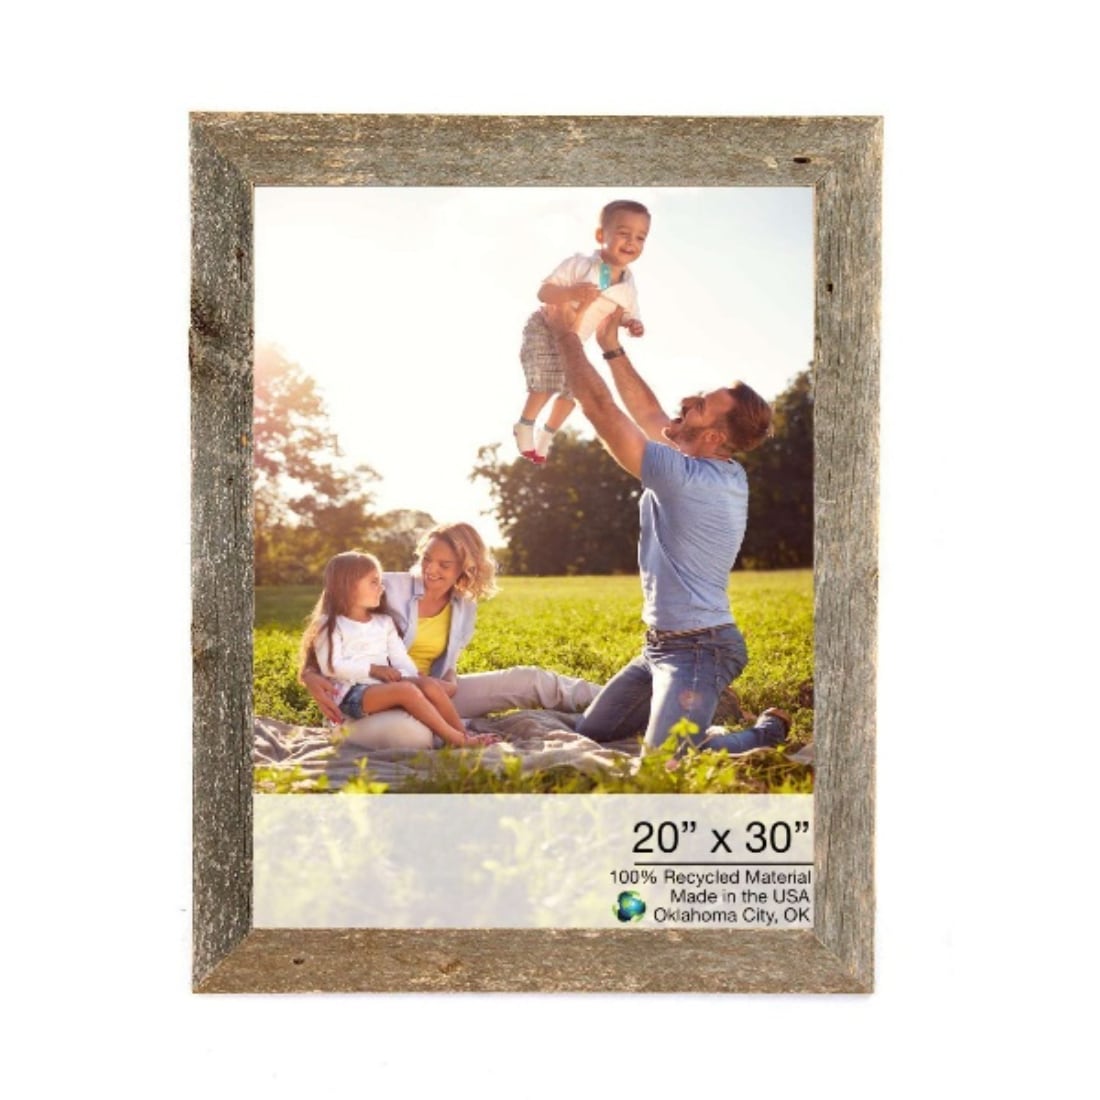 CustomPictureFrames 24x36 - 24 x 36 White Wash Flat Solid Wood Frame with UV Framer's Acrylic & Foam Board Backing - Great for